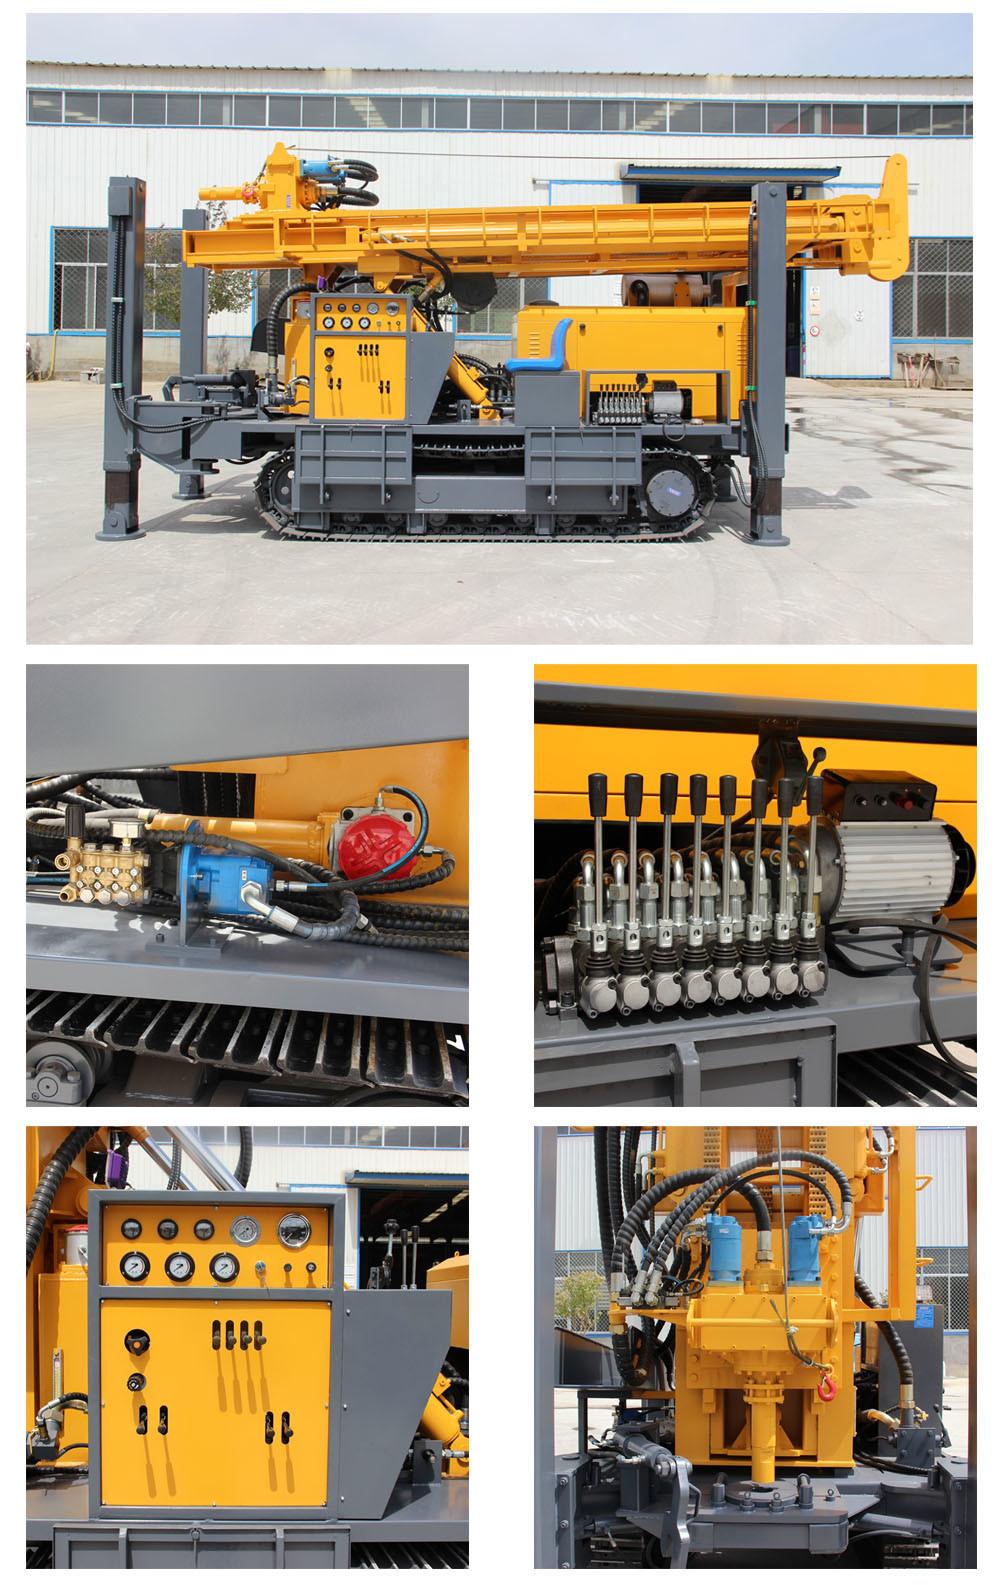 Medium Size High Quality Efficiency Open Air Borehole Water Well Drilling Rig Equipment